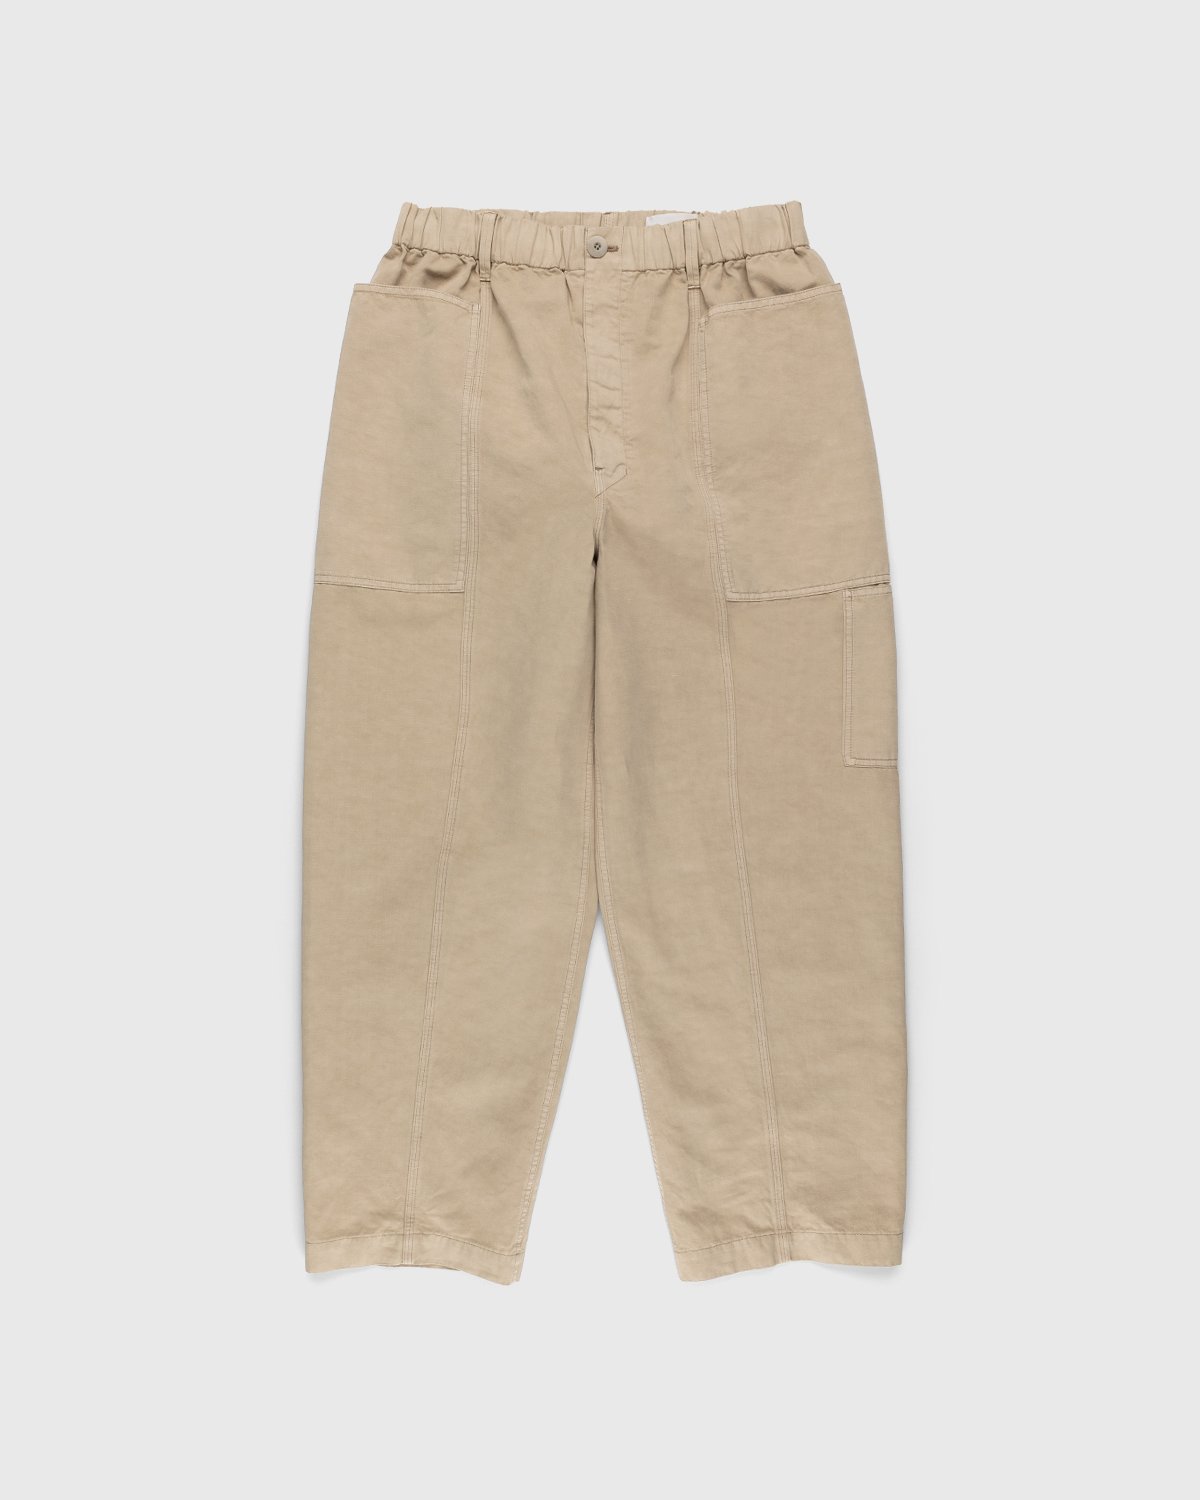 Lemaire - Fatigue Pants Natural Beige - Clothing - Beige - Image 1